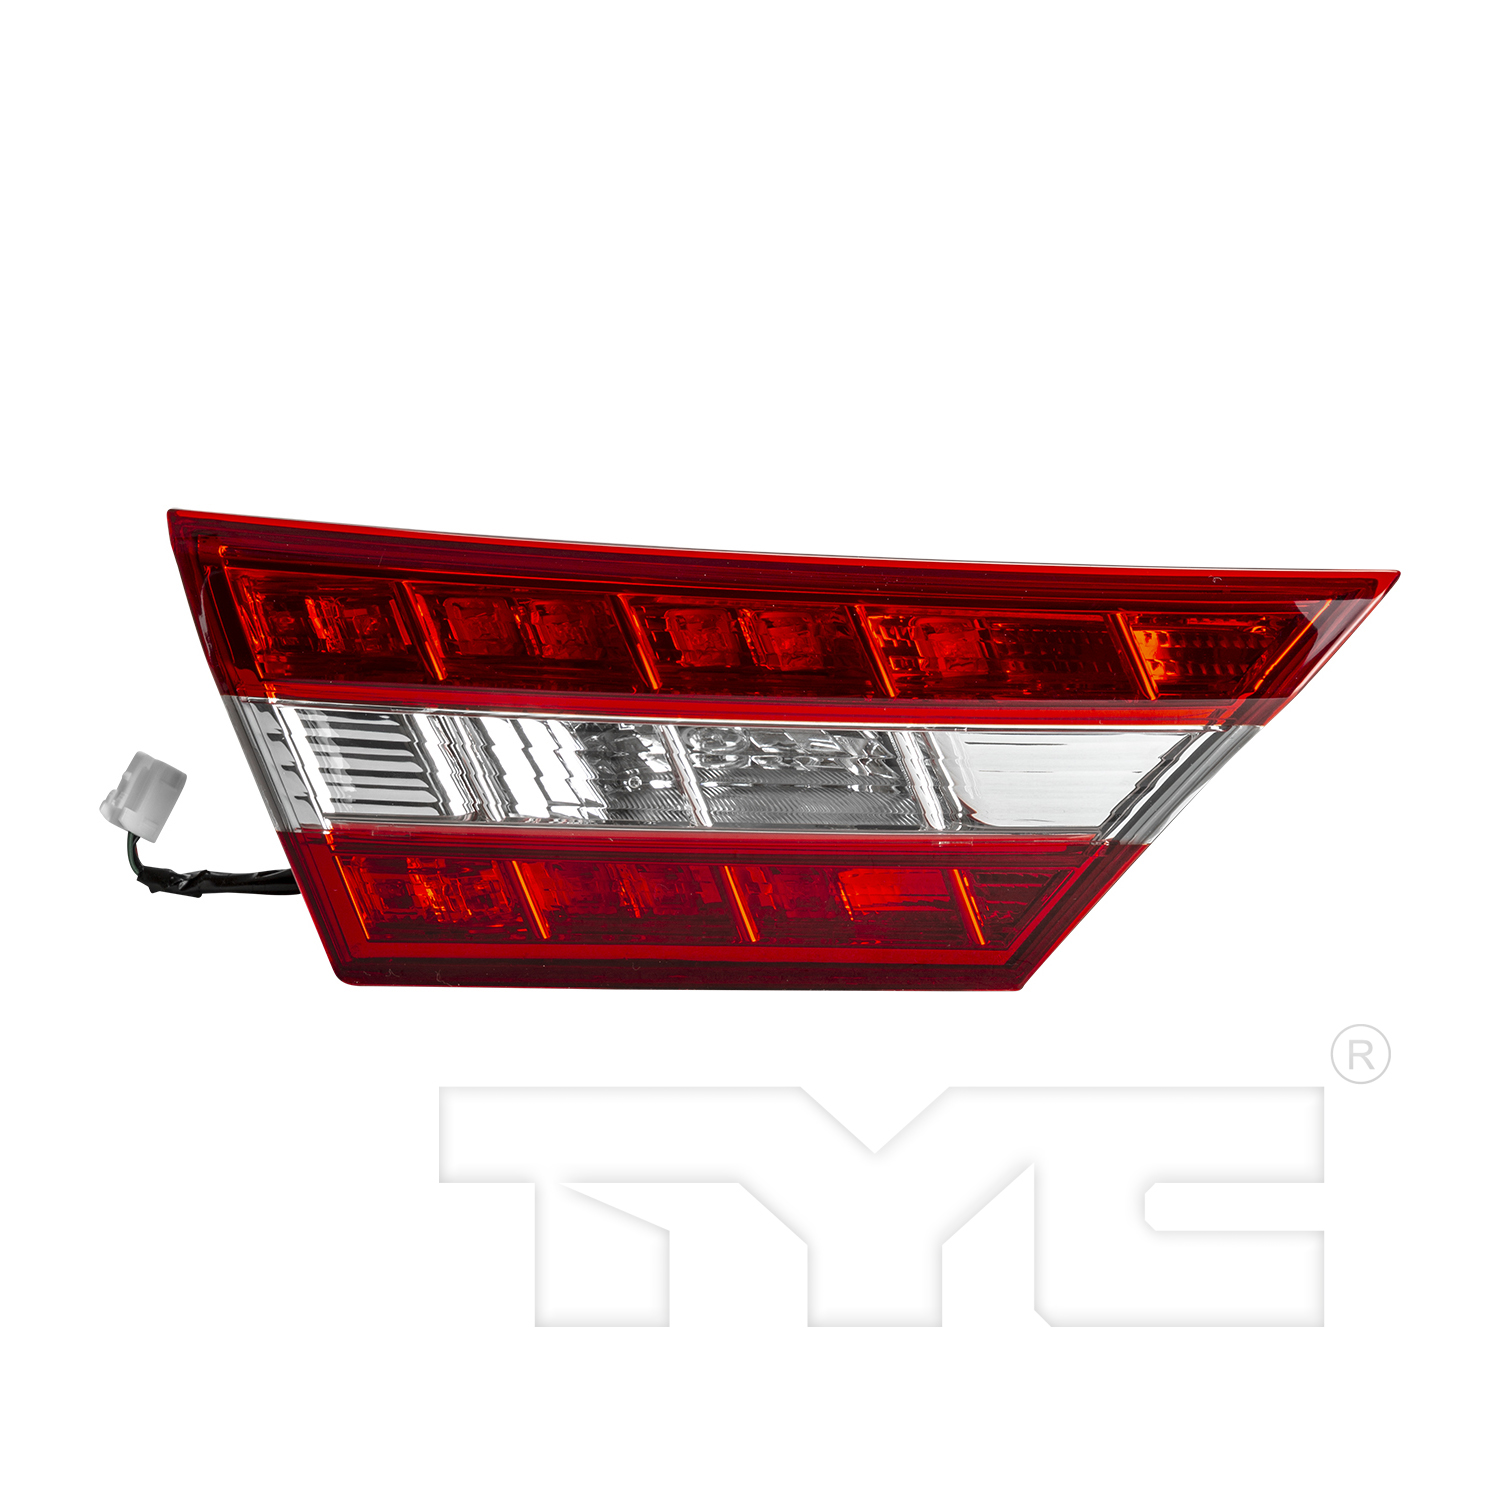 Aftermarket TAILLIGHTS for TOYOTA - AVALON, AVALON,13-15,LT Taillamp assy inner